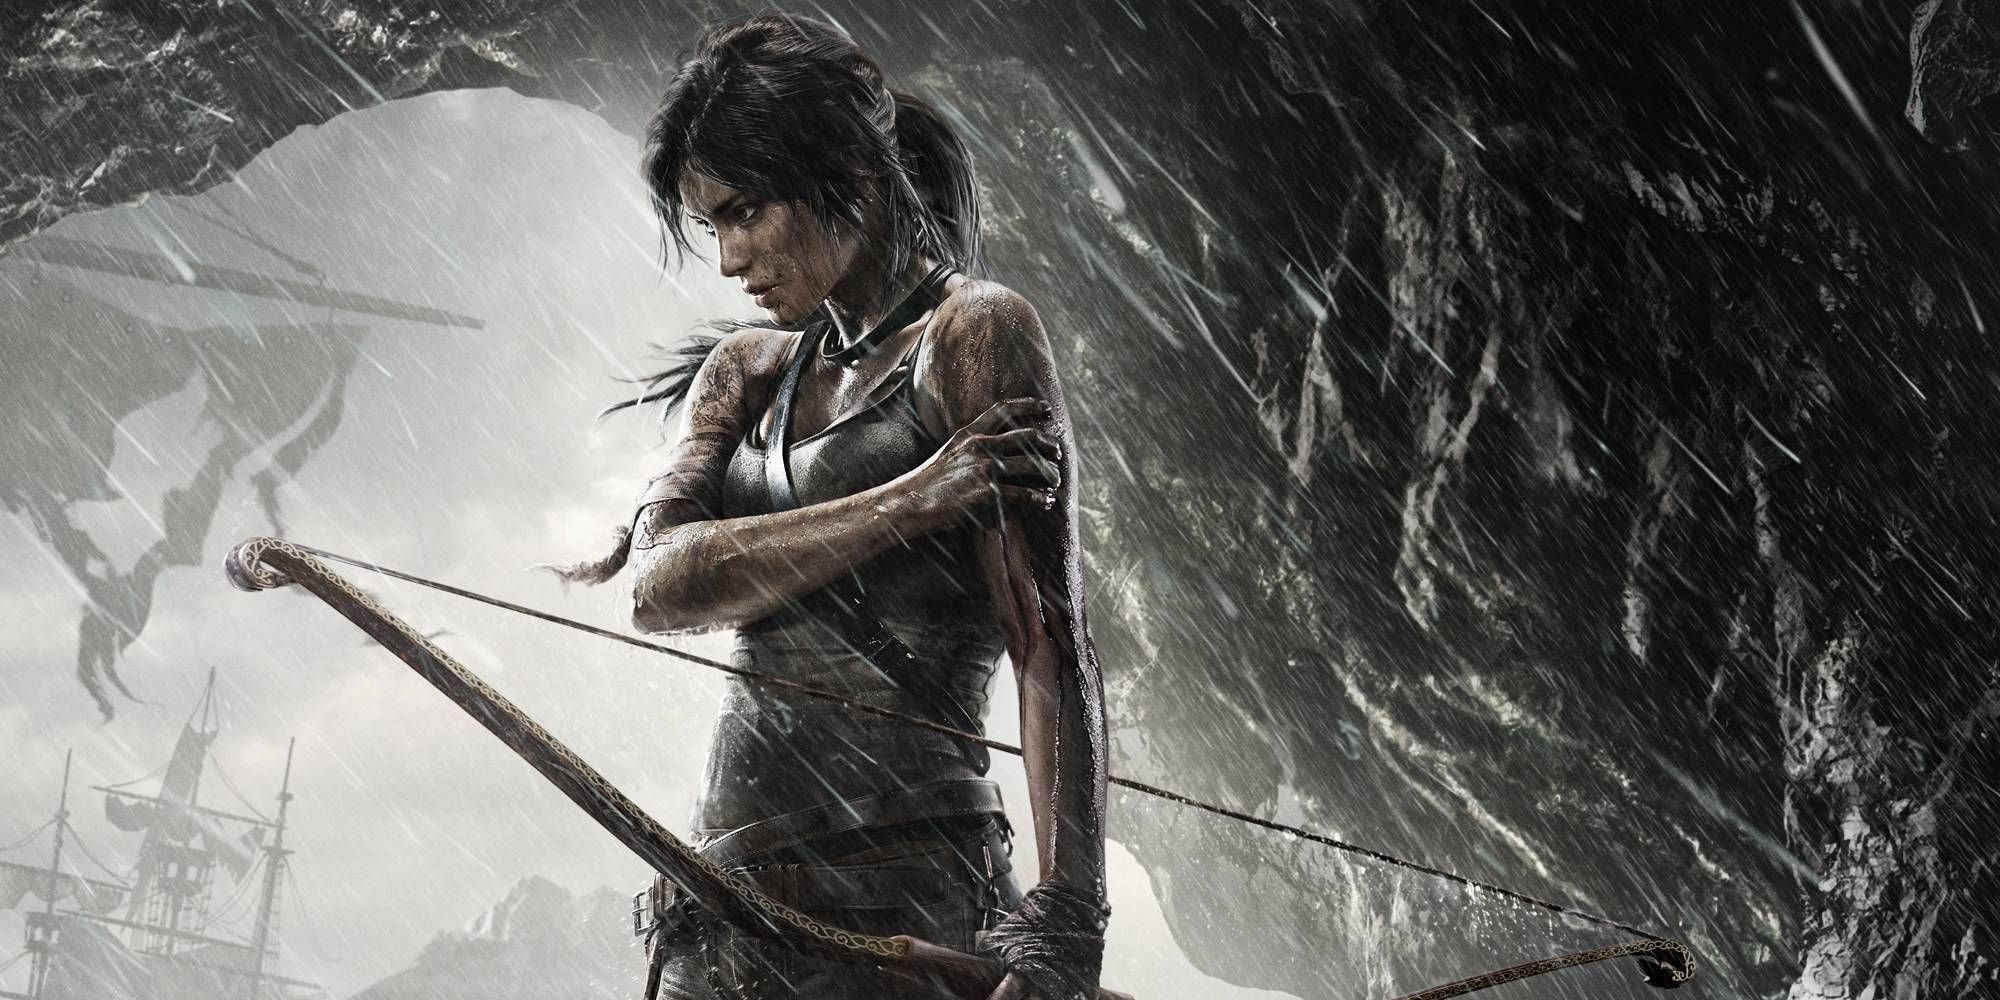 Lara Croft holding her arm in a cave from Tomb Raider 2013